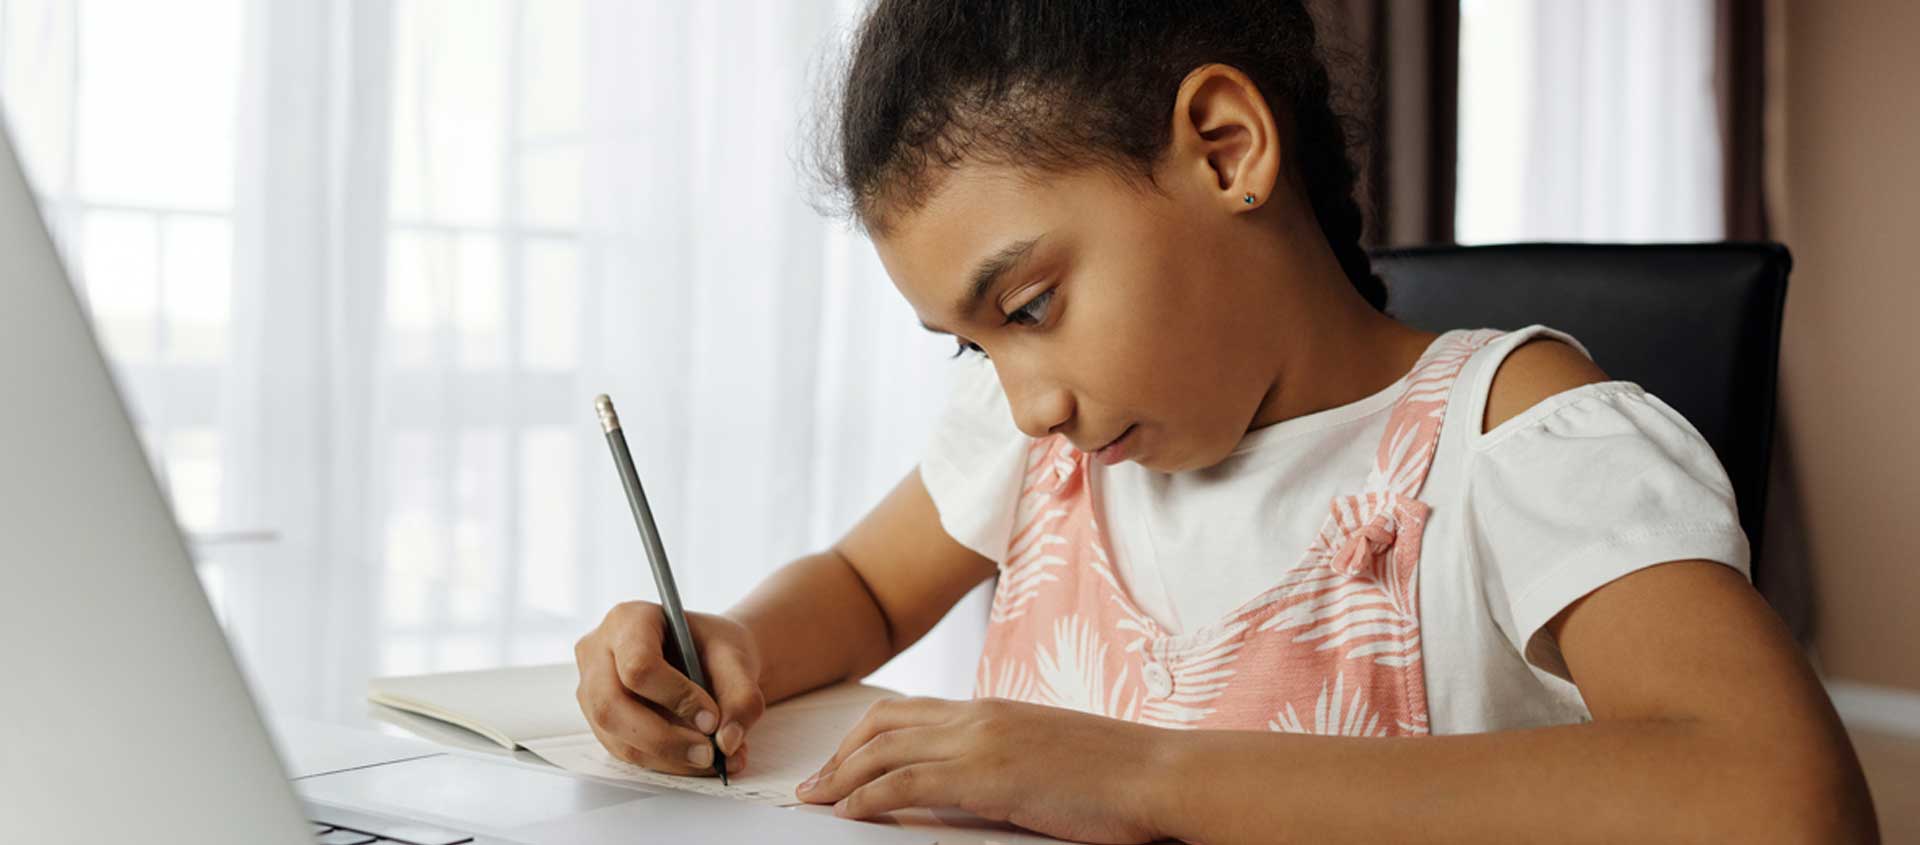 A school-age girl wrties at a desk in a home